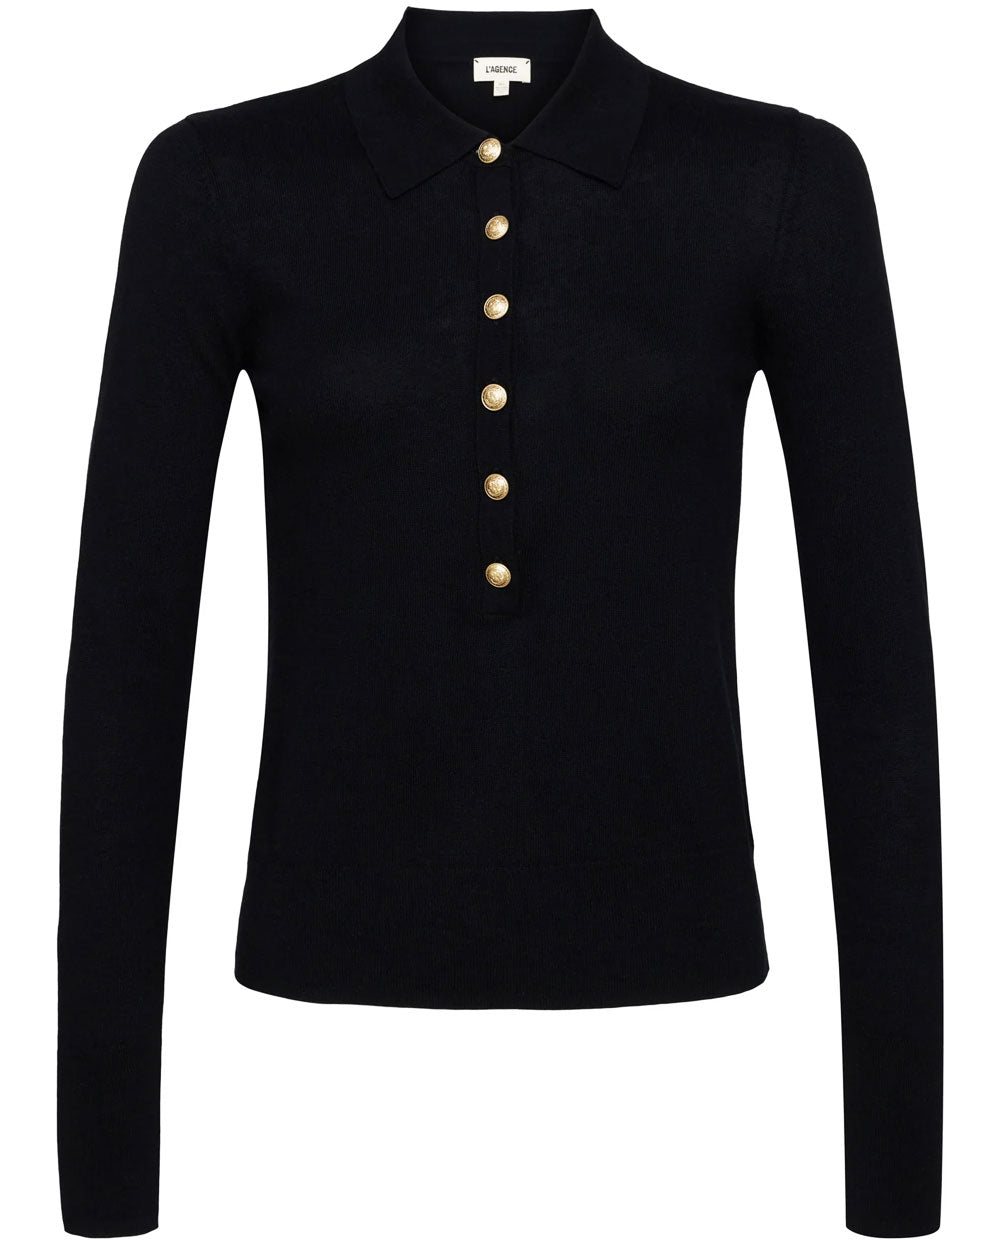 Black and Gold Sterling Collared Sweater